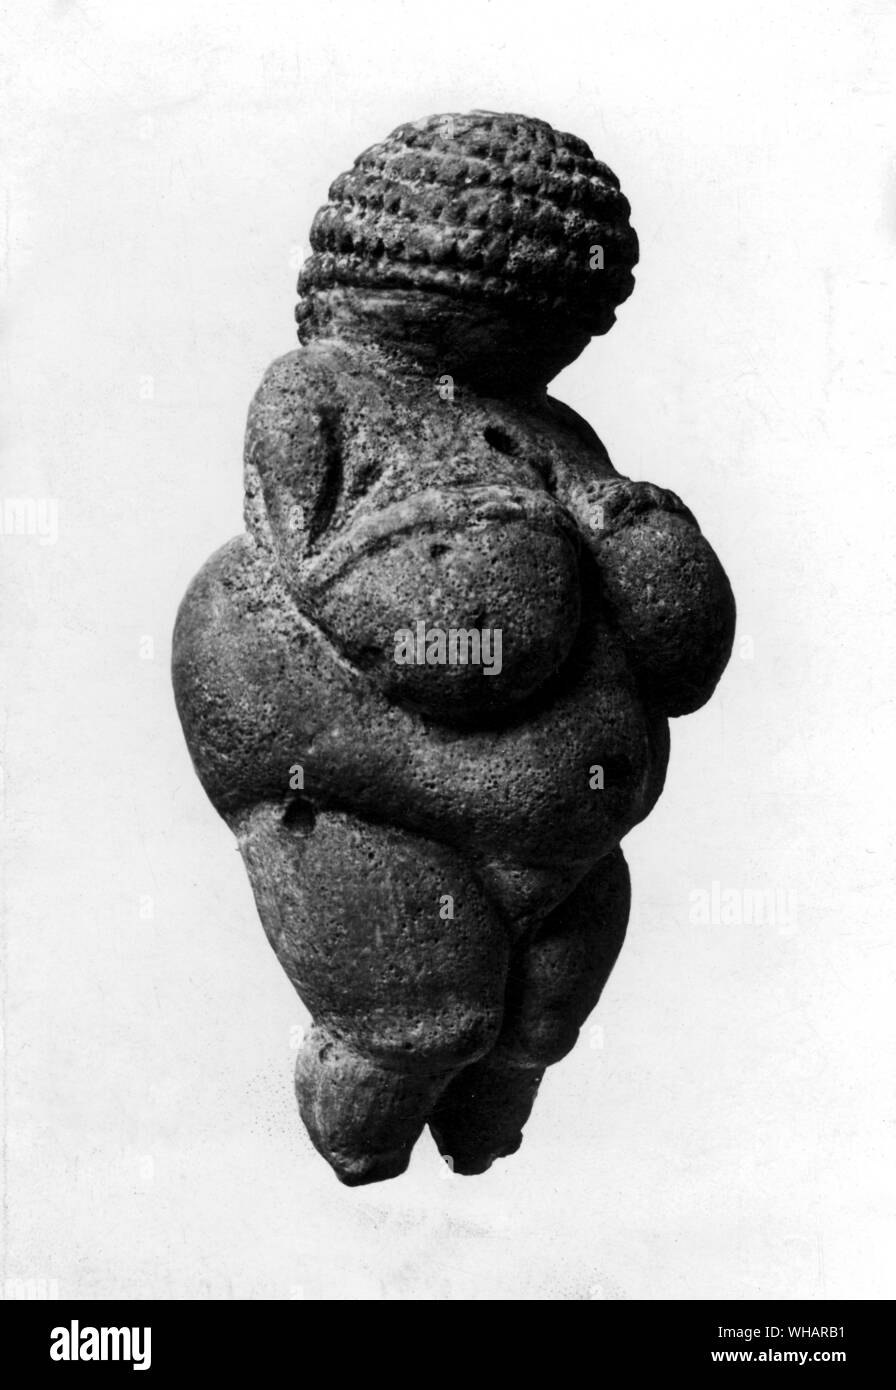 Paleaolithic sculpture. Fertility figure the Venus of Willendorf from Savignano sul Panaro found in 1908 by the archaeologist Josef Szombathy [see BIBLIOGRAPHY] in an Aurignacian loess deposit in a terrace about 30 meters above the Danube near the town of Willendorf in Austria. . . Stock Photo